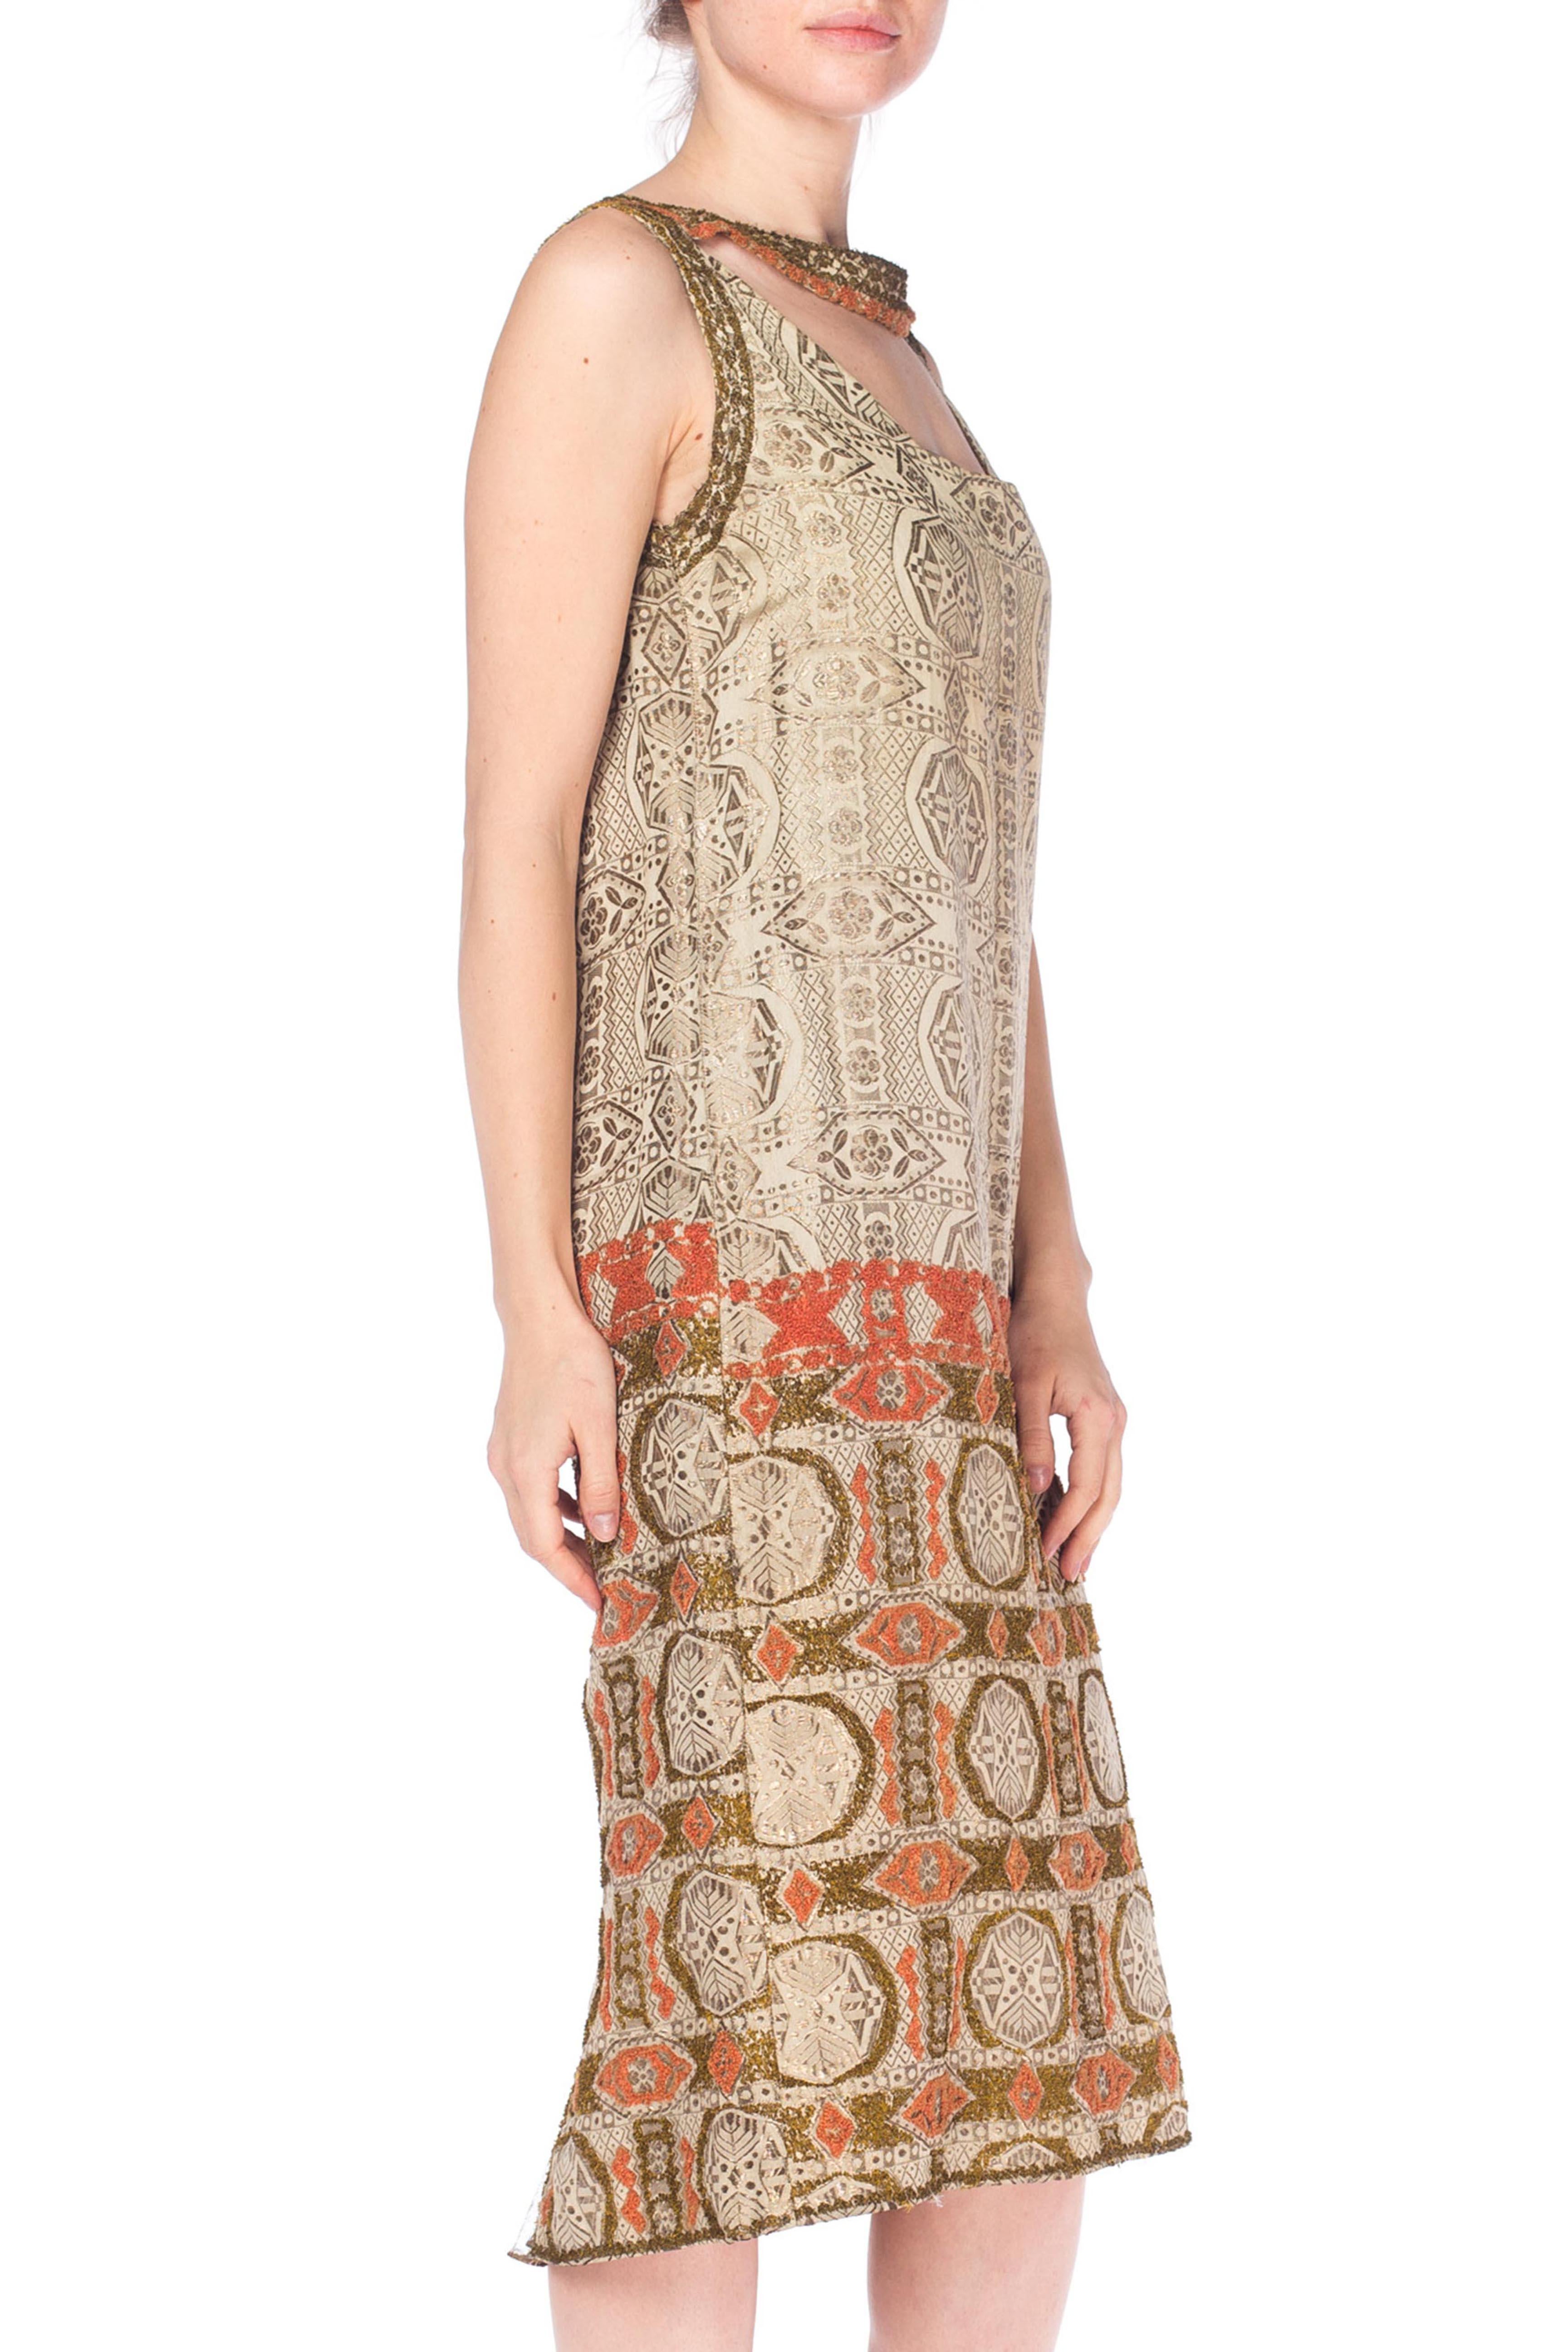 1920S Champagne Lamé Geometric Print  Dress With Coral & Gold French Knot Deco Pattern